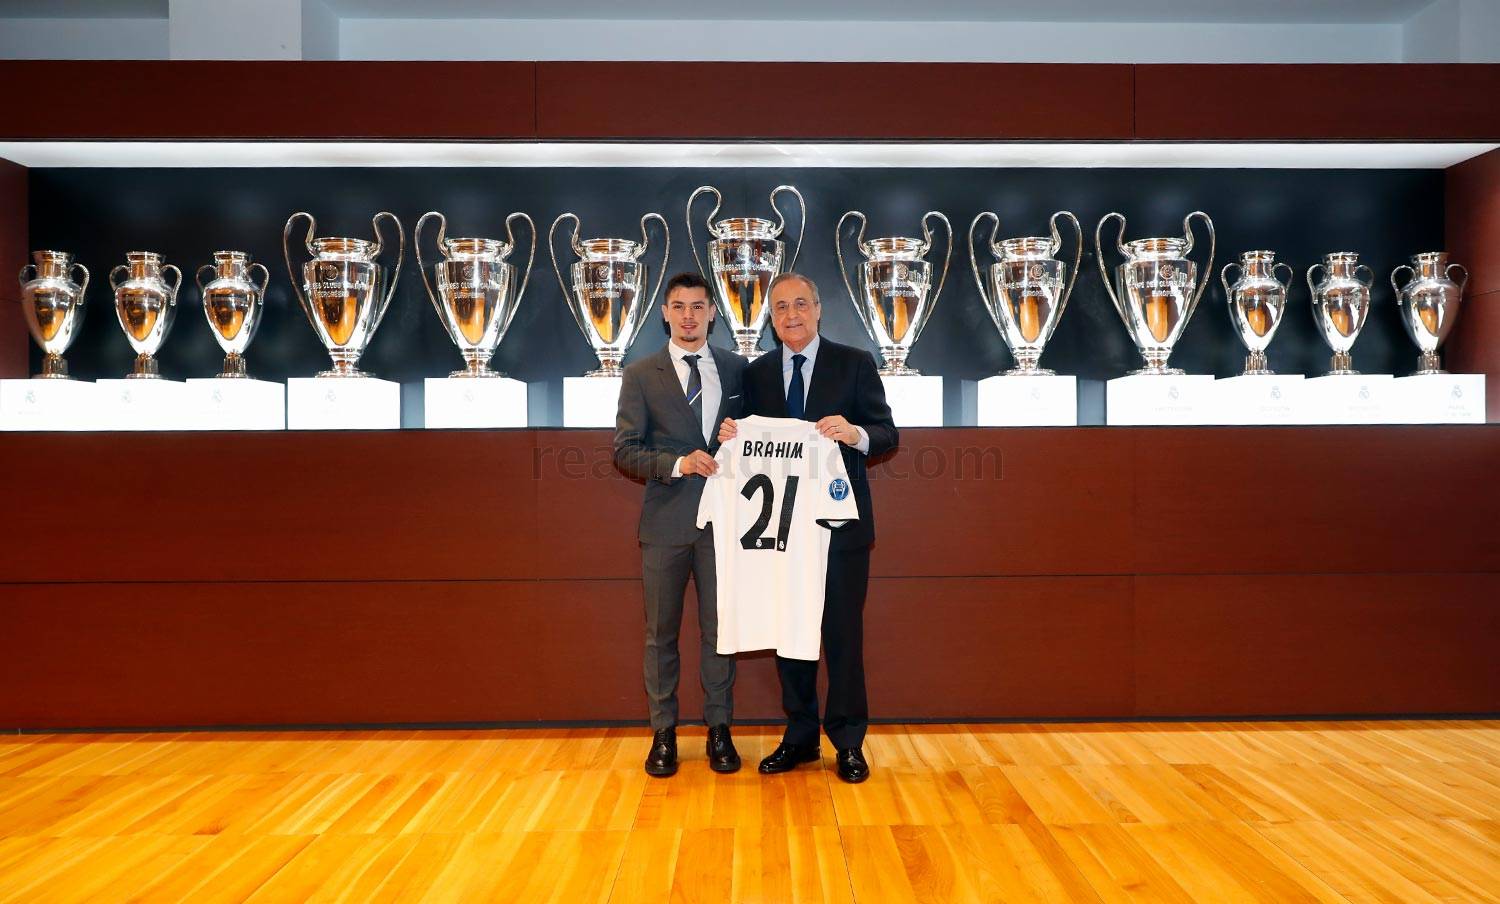 Foto: Site oficial do Real Madrid